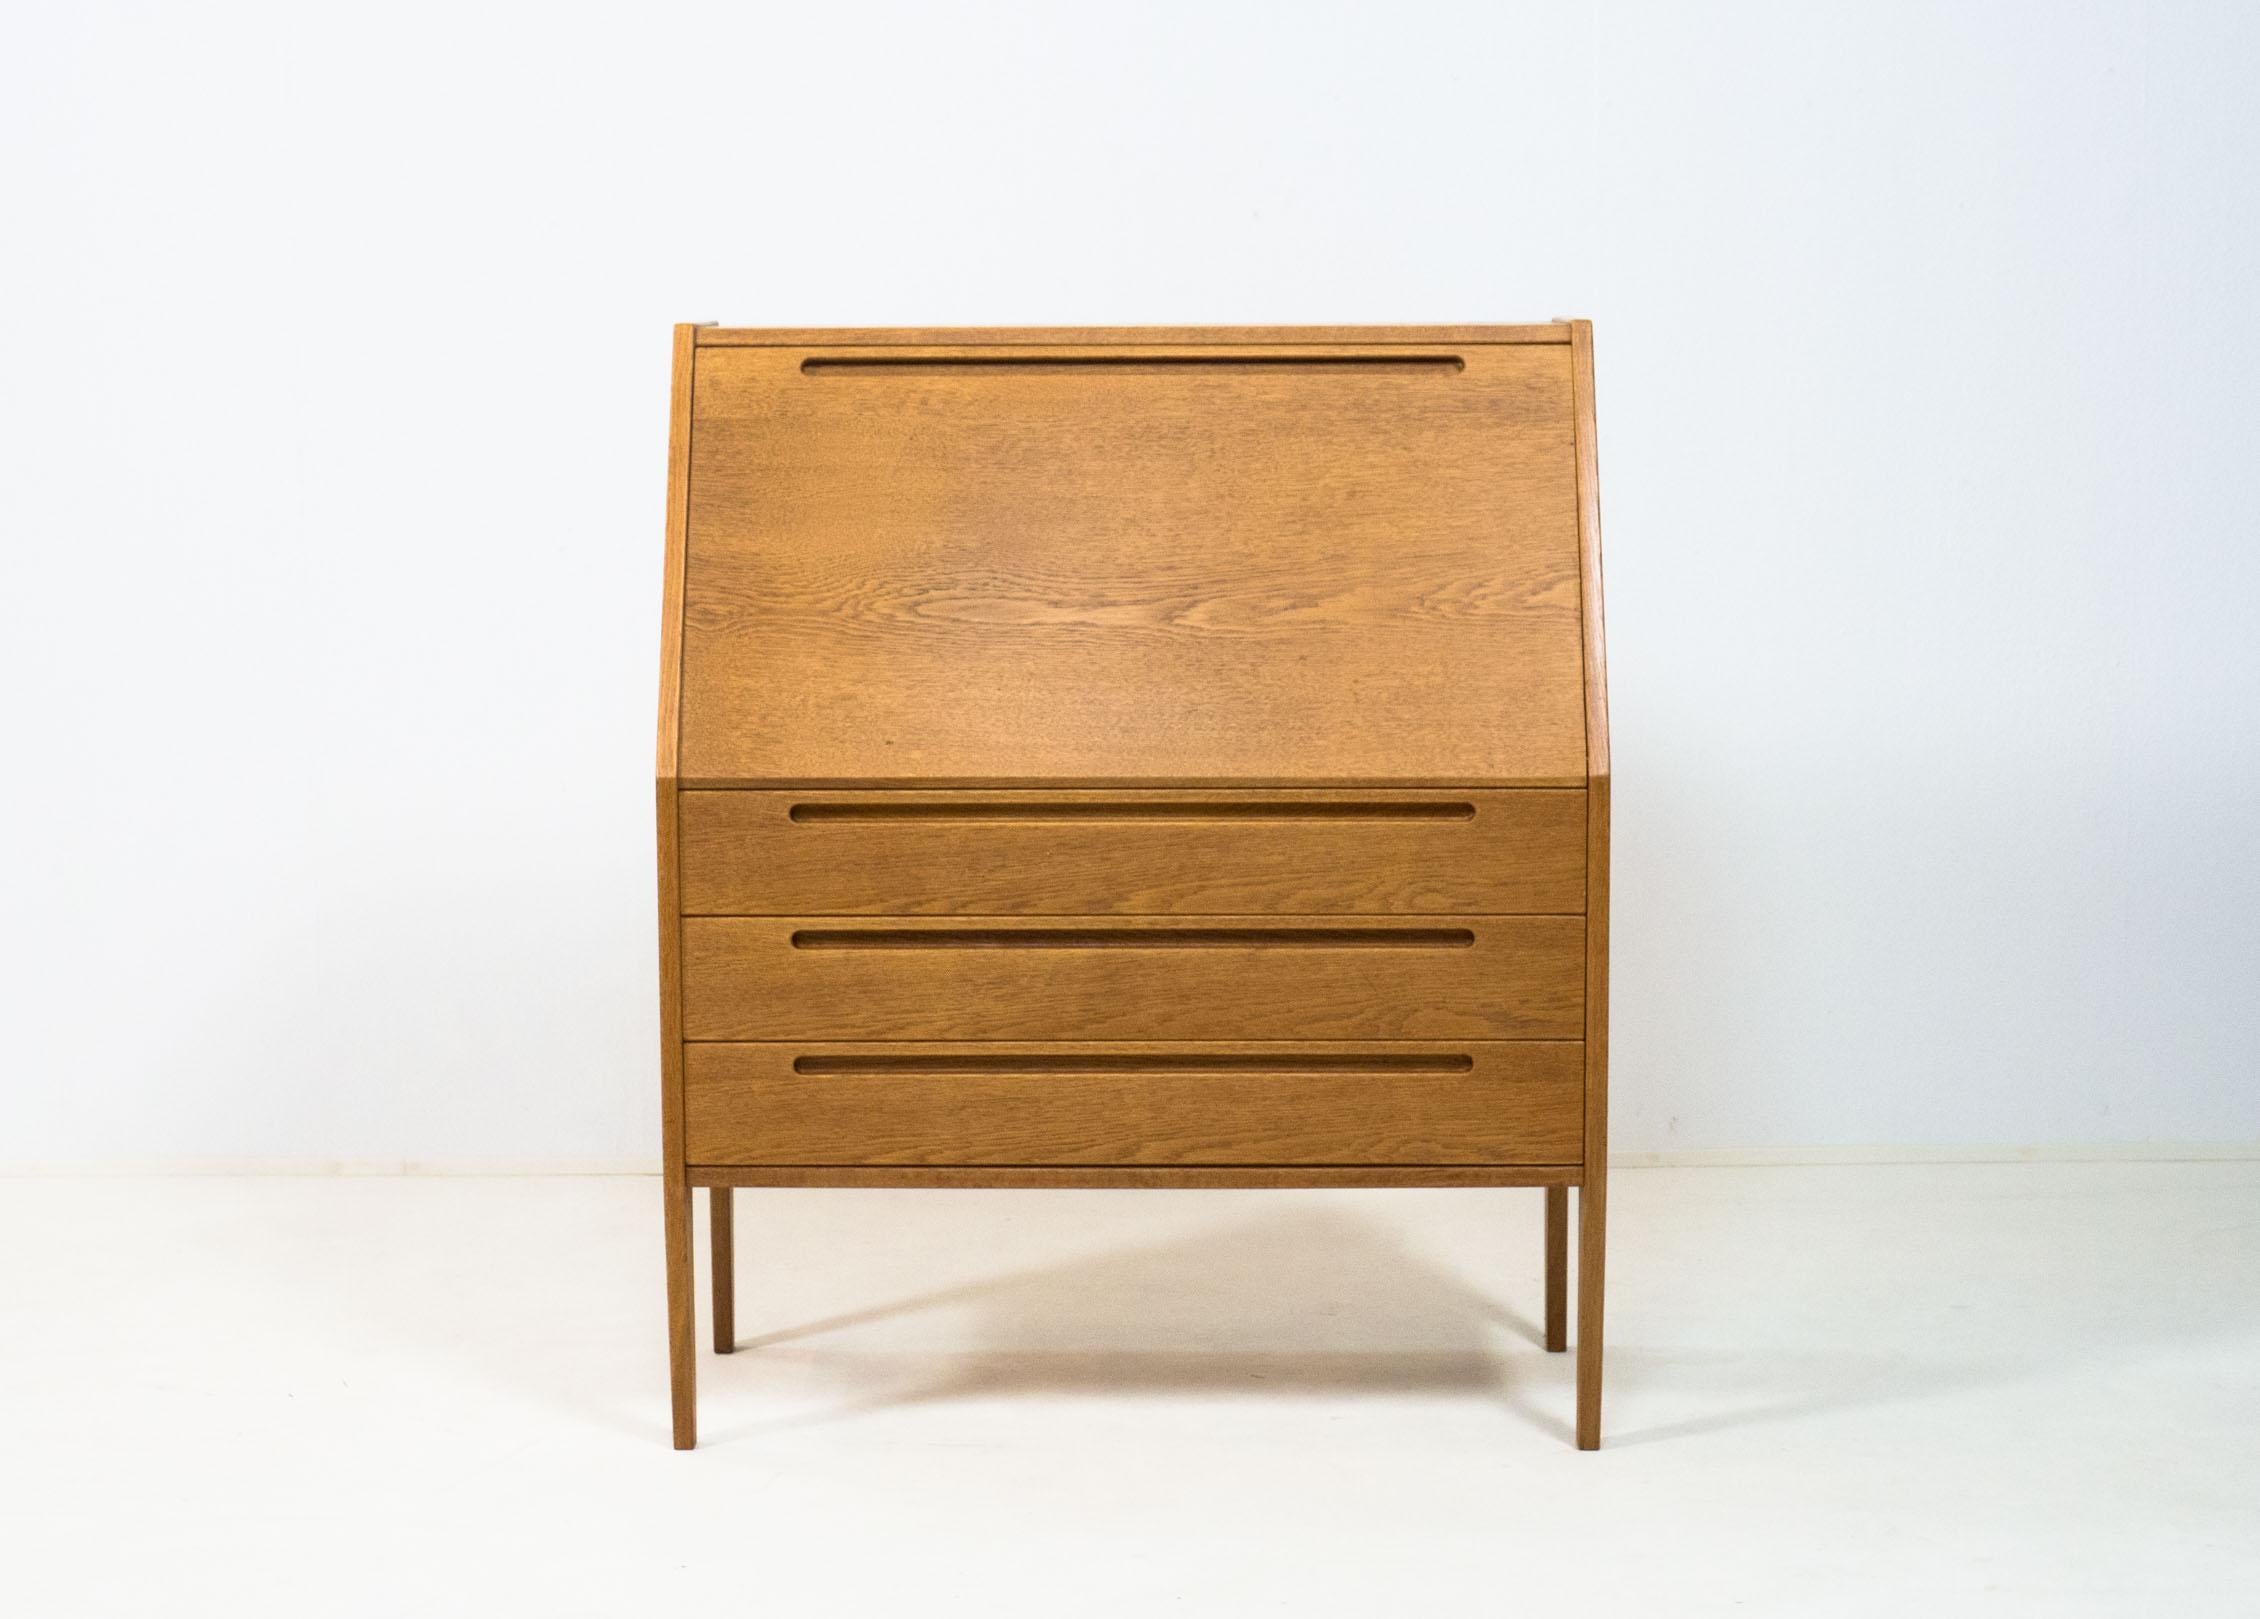 Vintage fold out secretary writing cabinet designed by Kai Kristiansen for Tørring Møbelfabrik of Denmark, 1960s.

This cabinet is veneered in oak and has solid oak embedded feet and edges.
It has three large drawers on the outside and three smaller